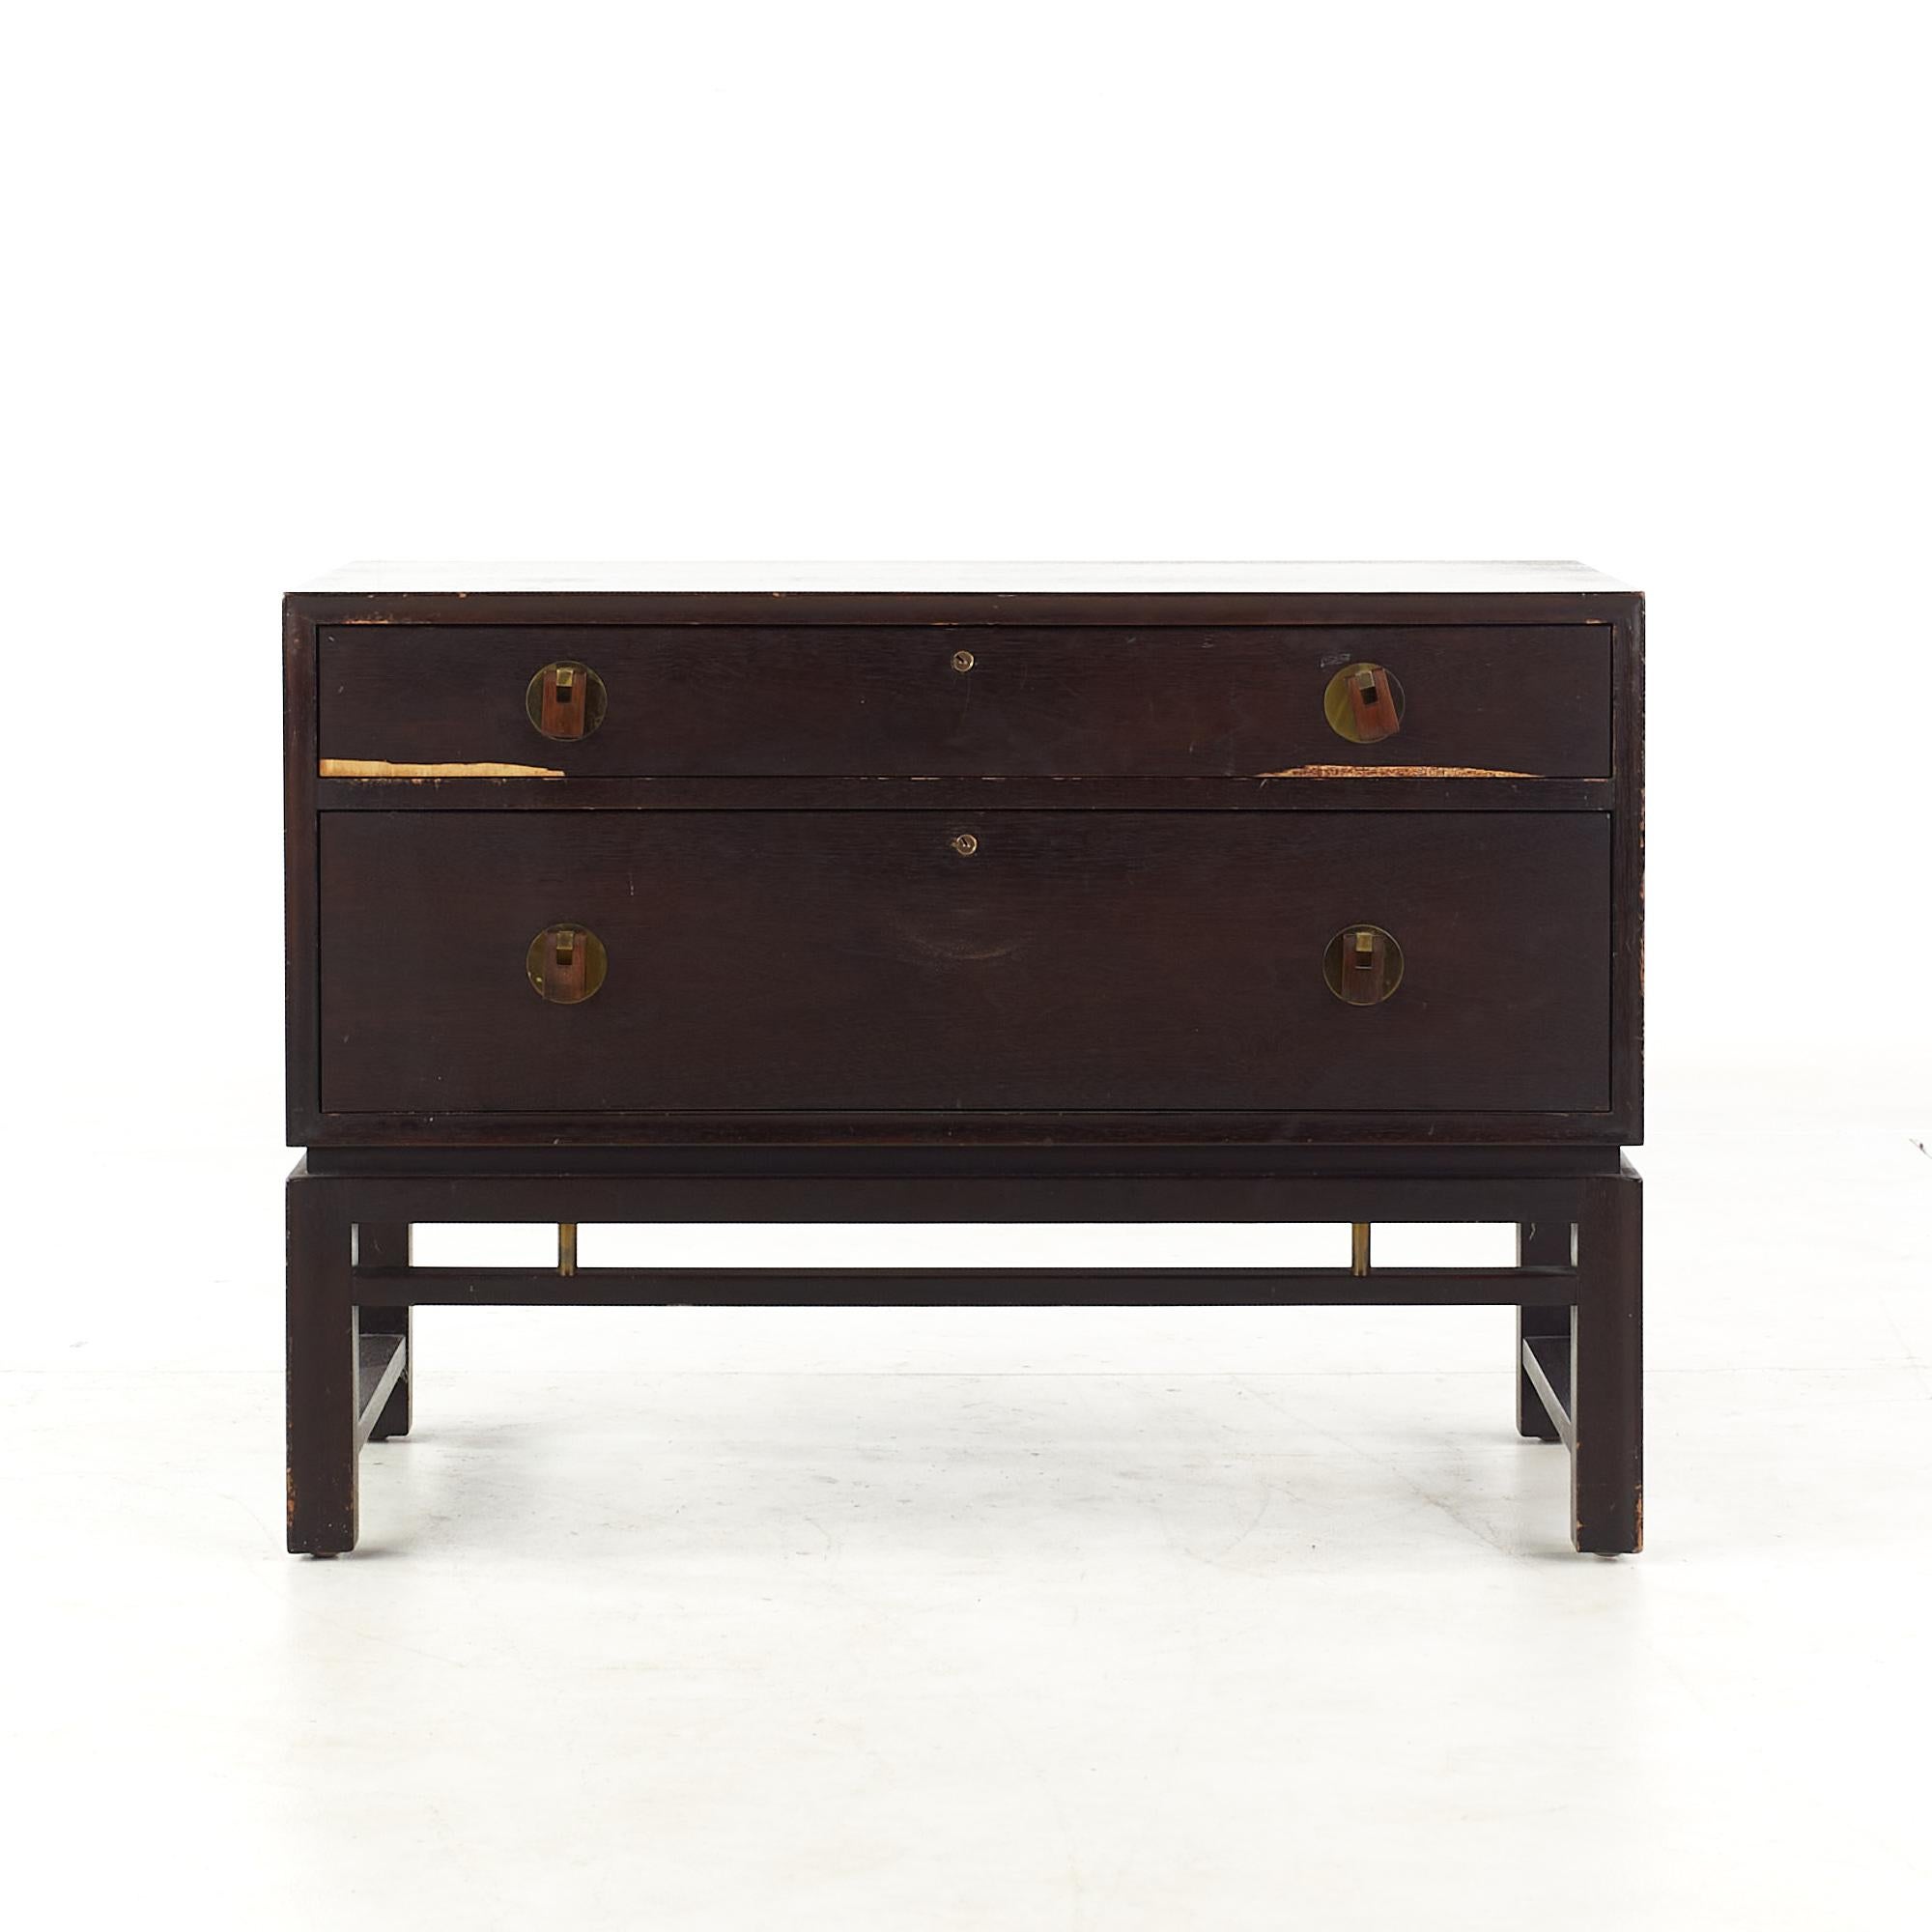 Edward Wormley for Dunbar Mid Century nightstand

This nightstand measures: 23 wide x 18 deep x 23.75 inches high

All pieces of furniture can be had in what we call restored vintage condition. That means the piece is restored upon purchase so